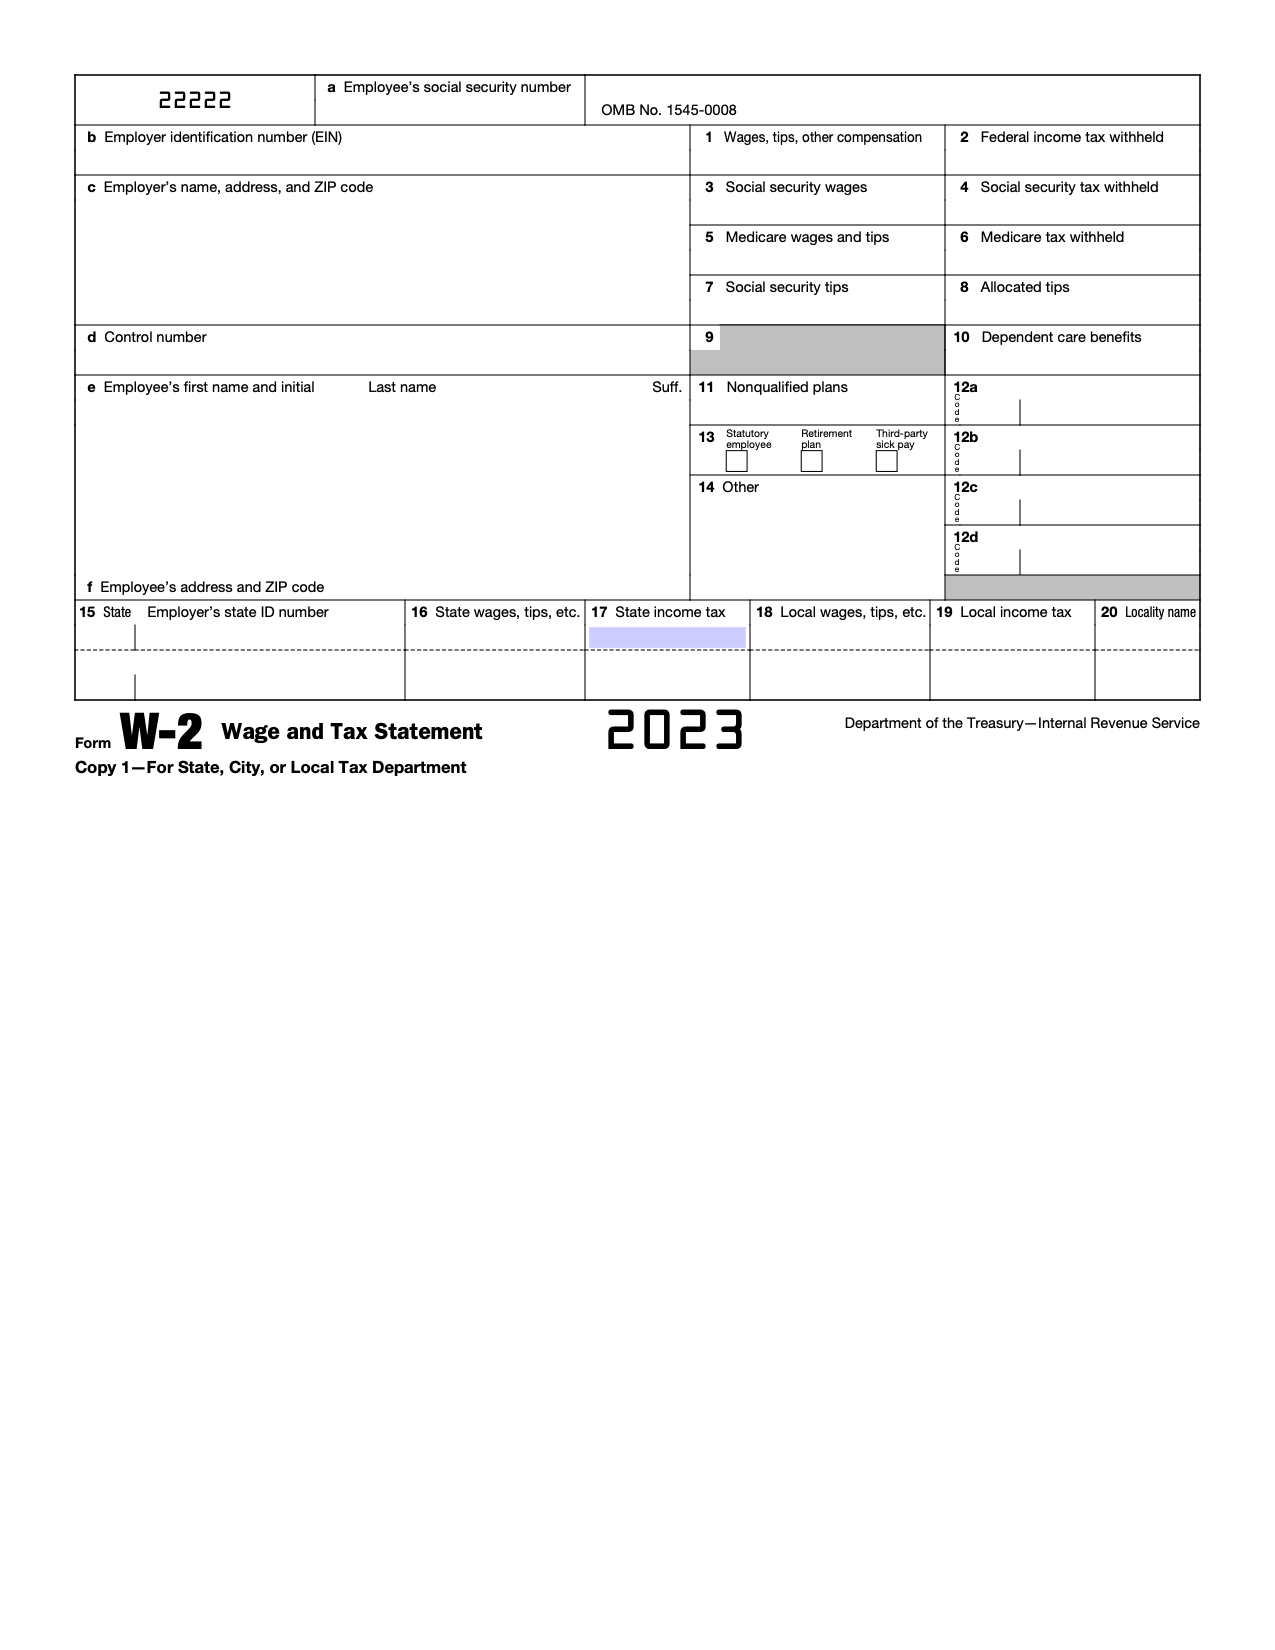 Free Irs Form W-2 | Wage And Tax Statement - Pdf – Eforms throughout 2022 W2 Form Printable